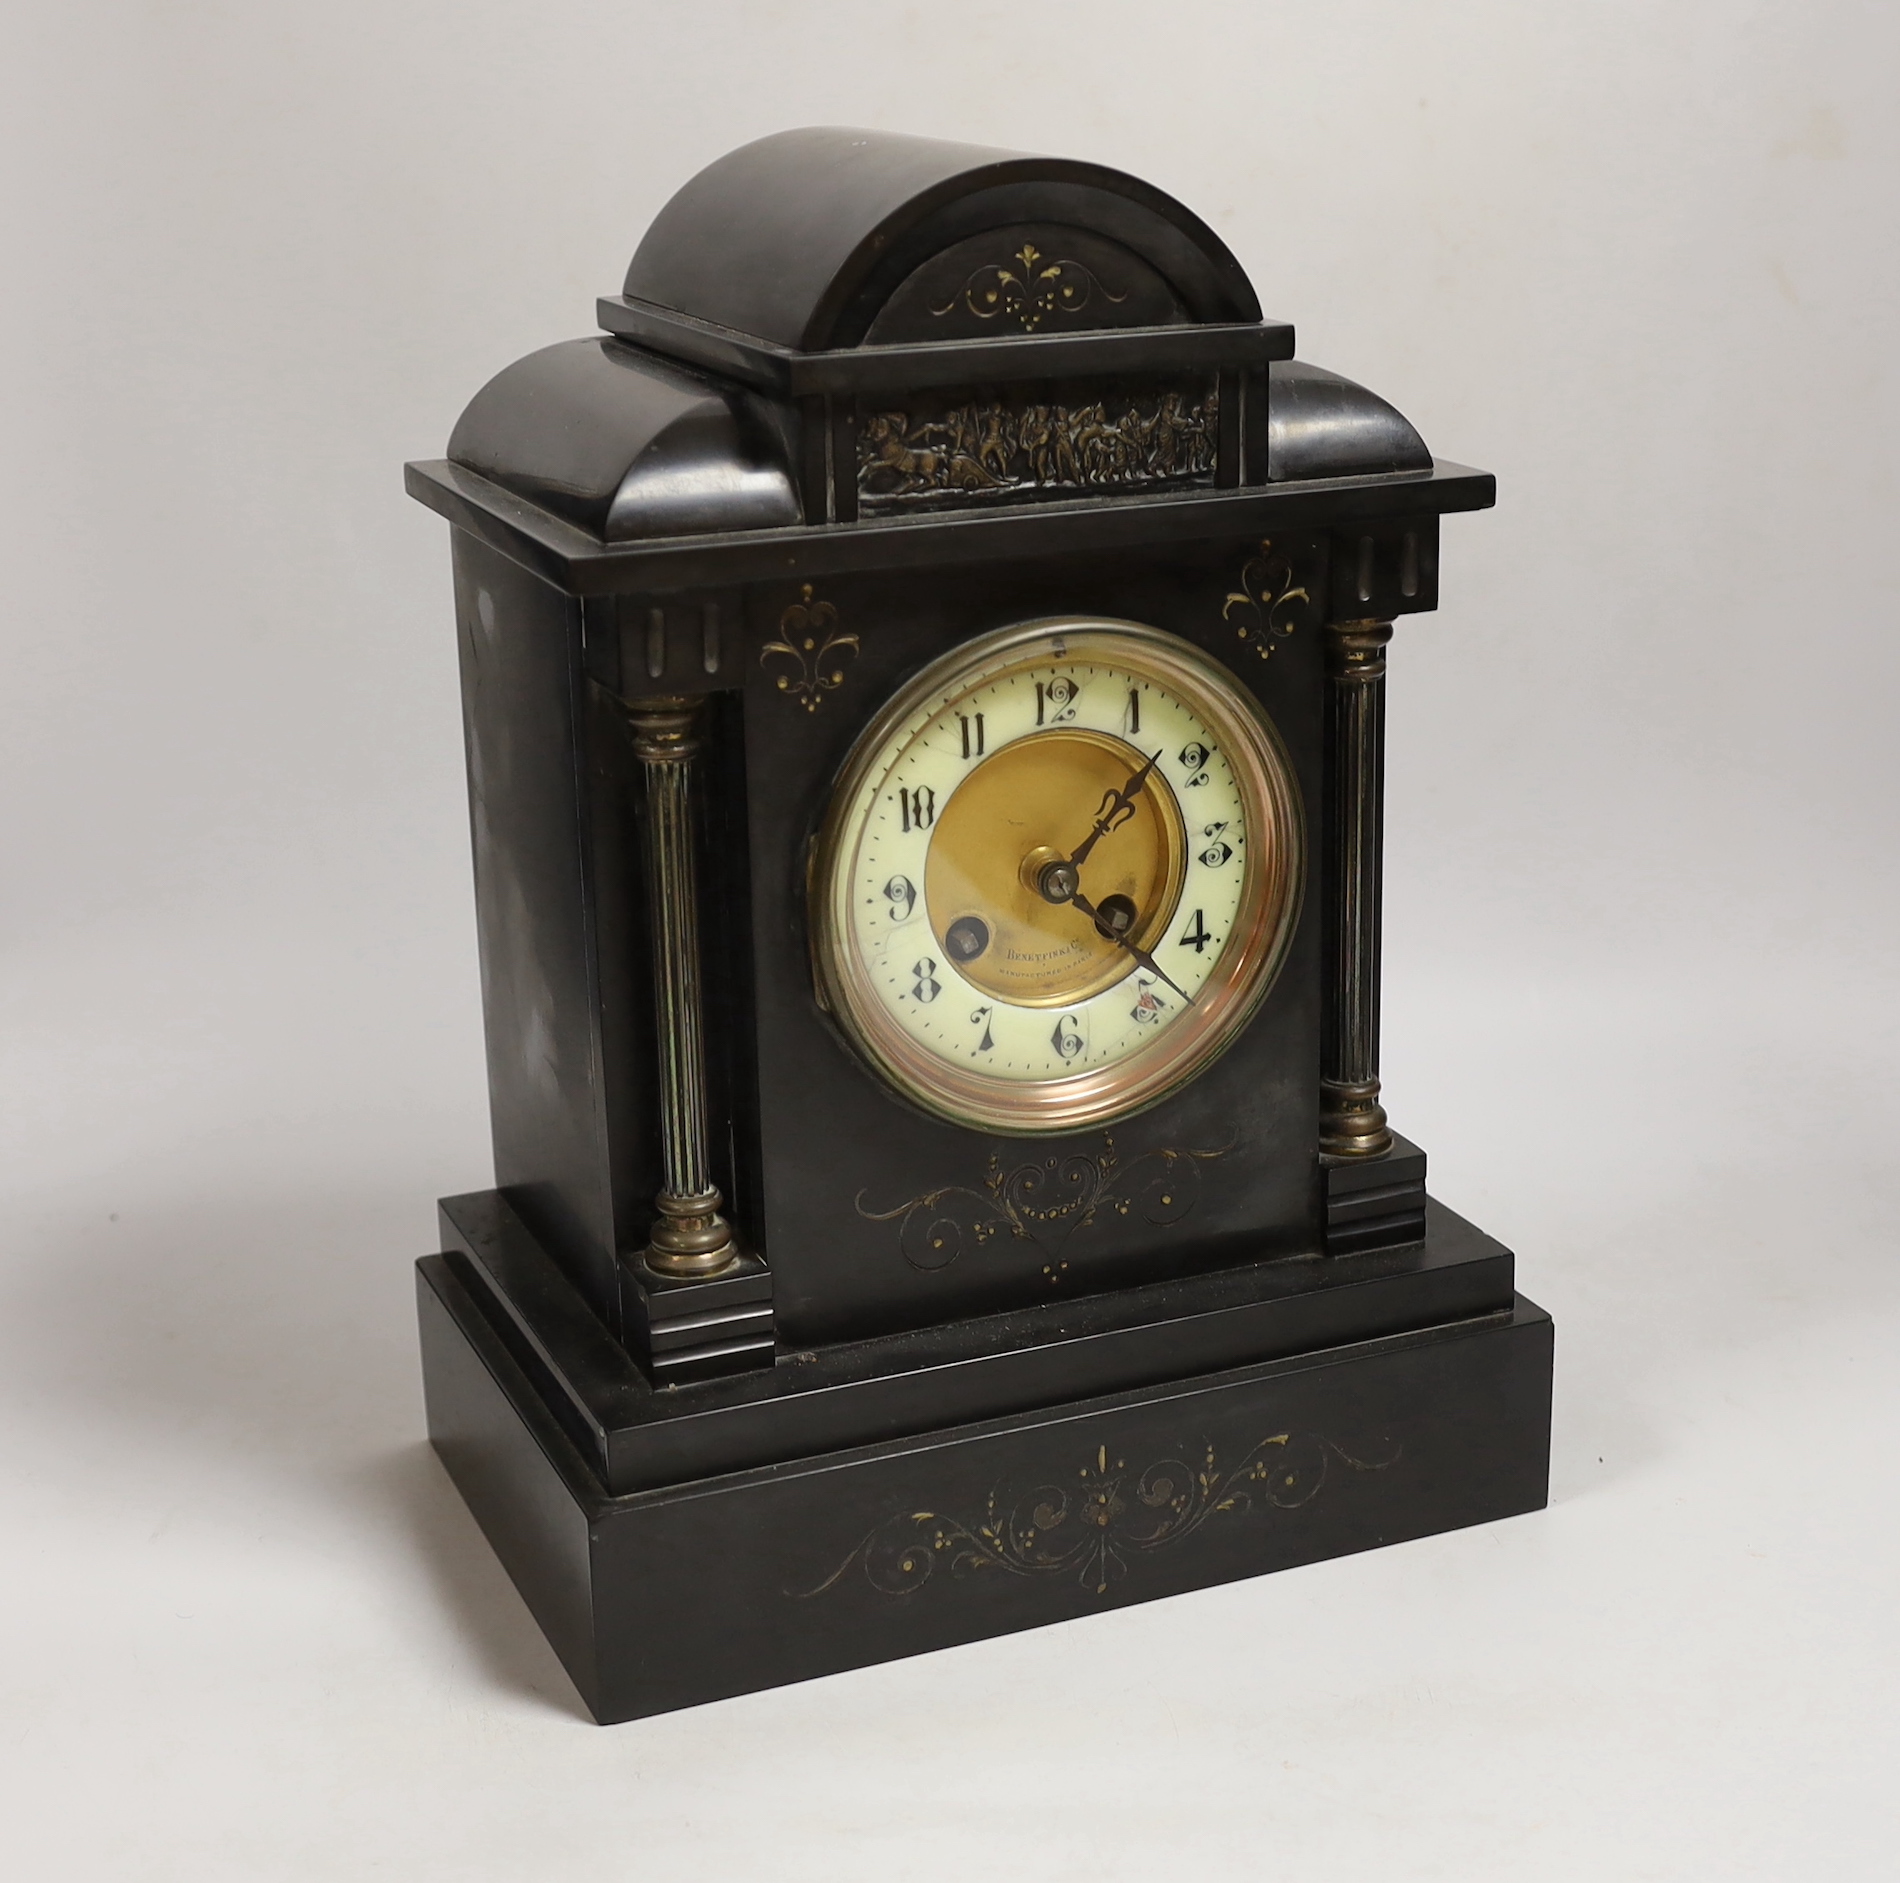 A Victorian slate mantel clock, French movement striking on a gong, dial signed Benetfink, 24cm wide